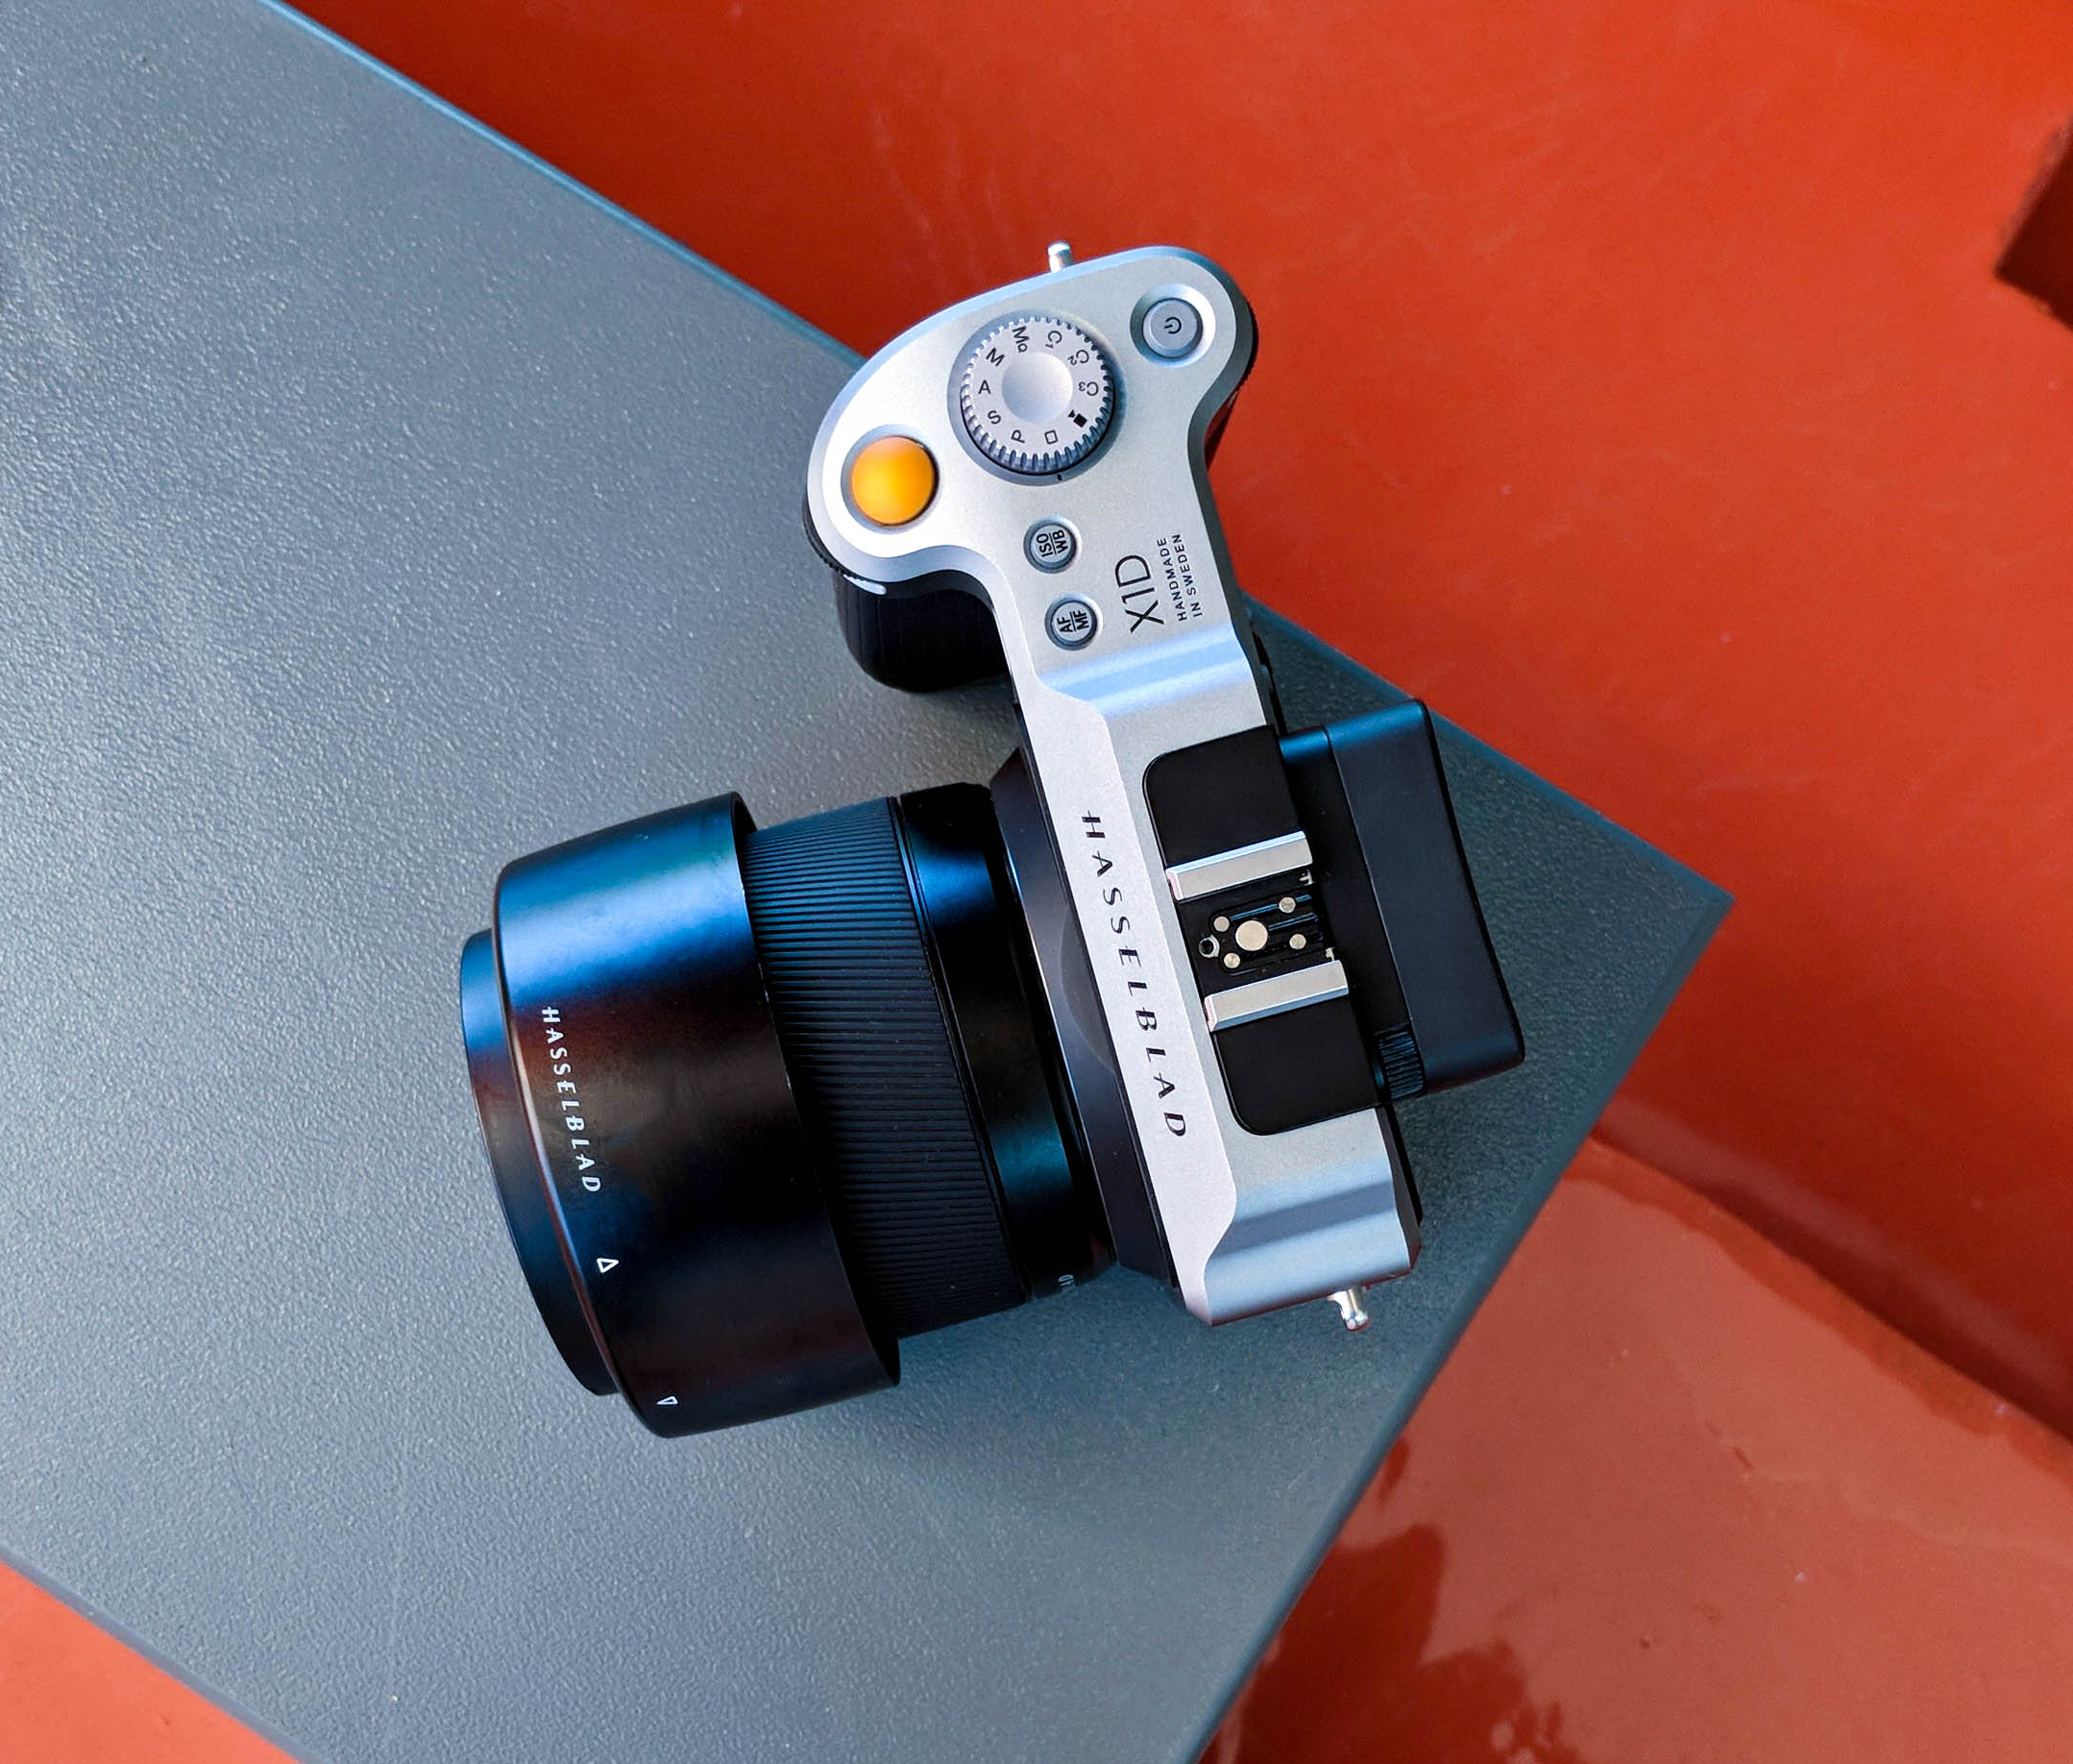 In Review: The Mighty Hasselblad X1D